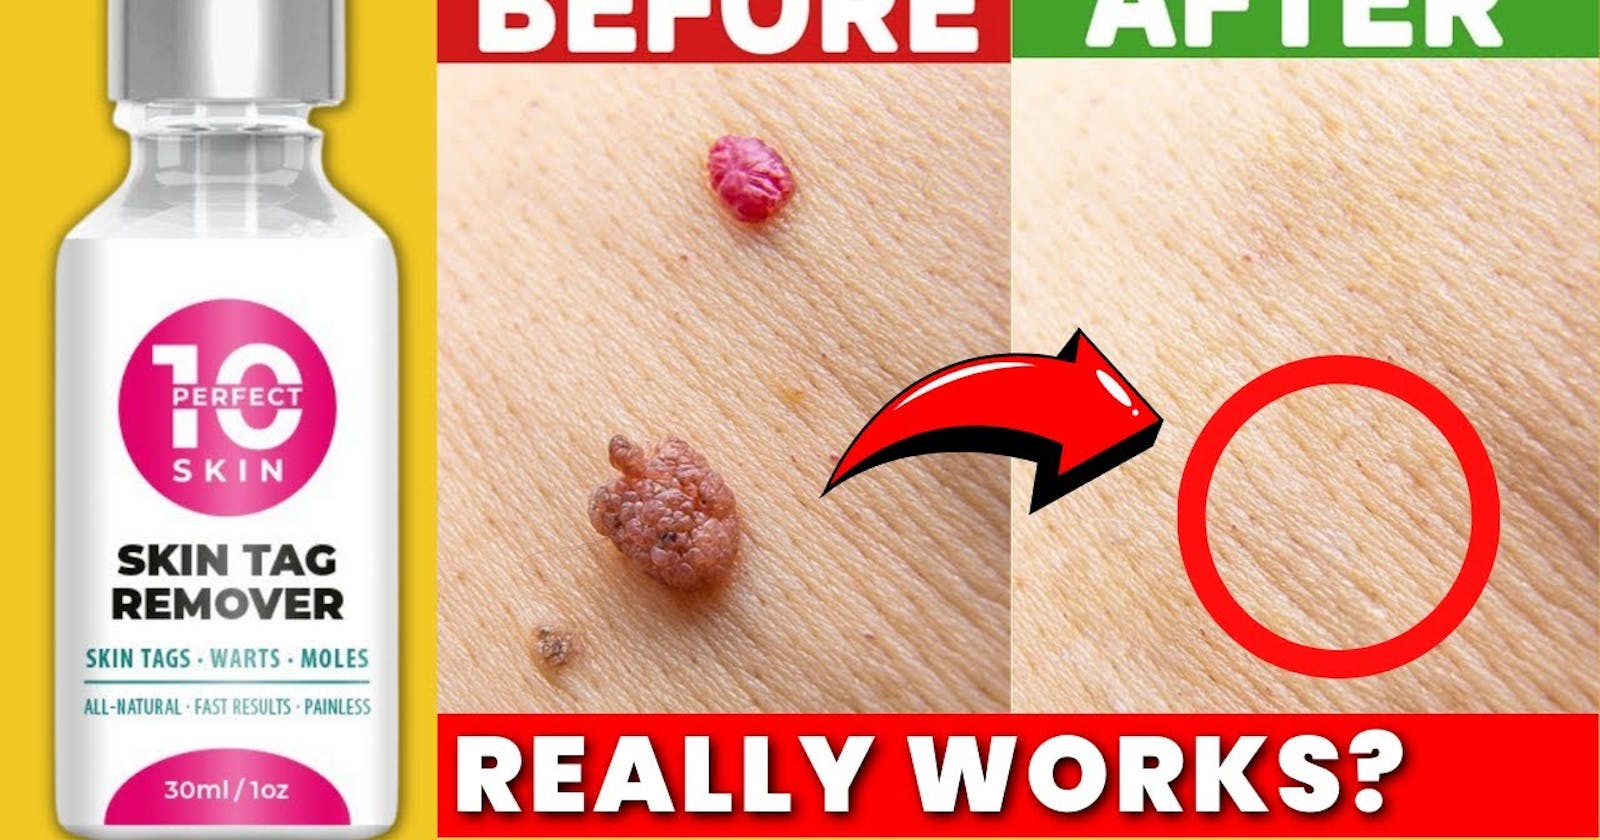 Perfect 10 Skin Tag Remover REVIEWS [Scam OR Legit] Exposed Benefits Price